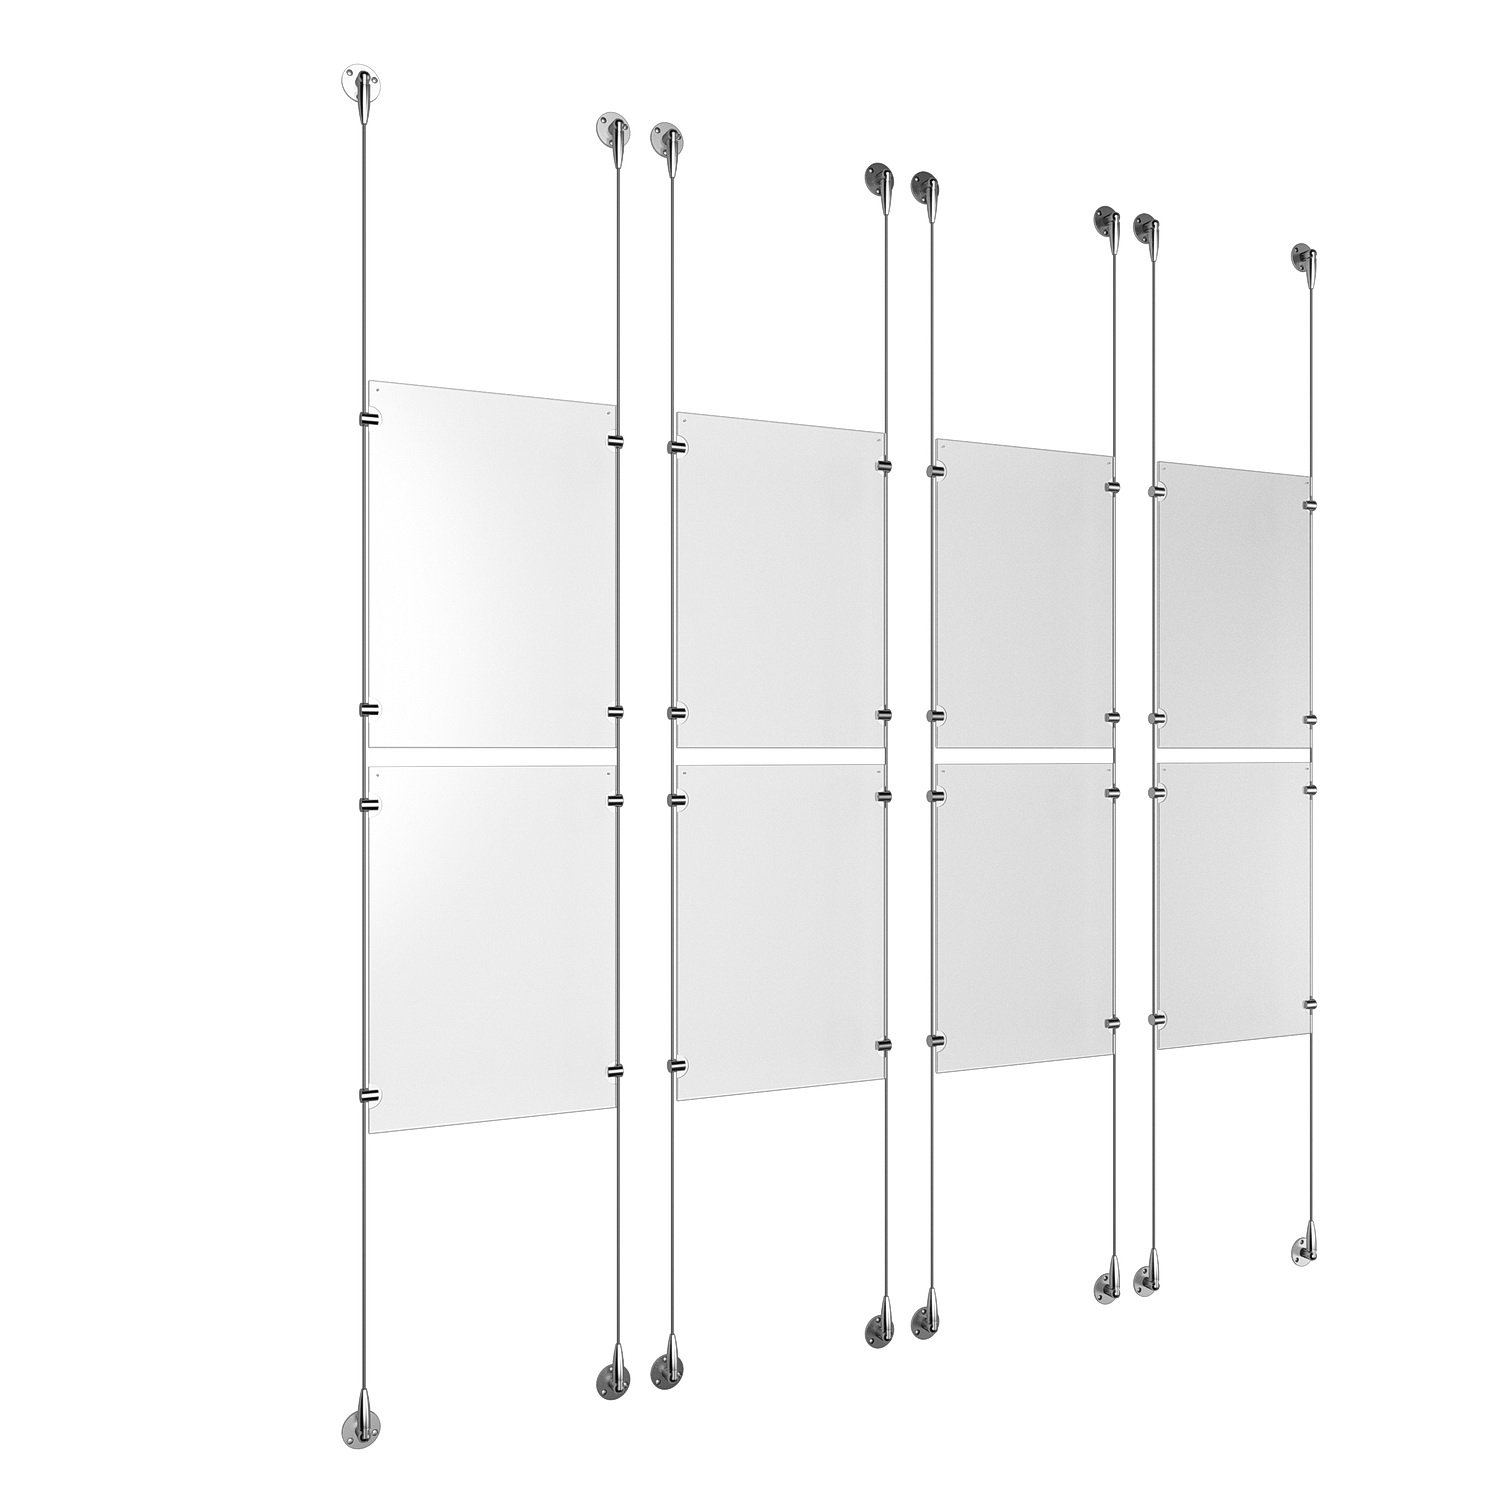 (8) 11'' Width x 17'' Height Clear Acrylic Frame & (8) Stainless Steel Satin Brushed Adjustable Angle Signature 1/8'' Cable Systems with (32) Single-Sided Panel Grippers